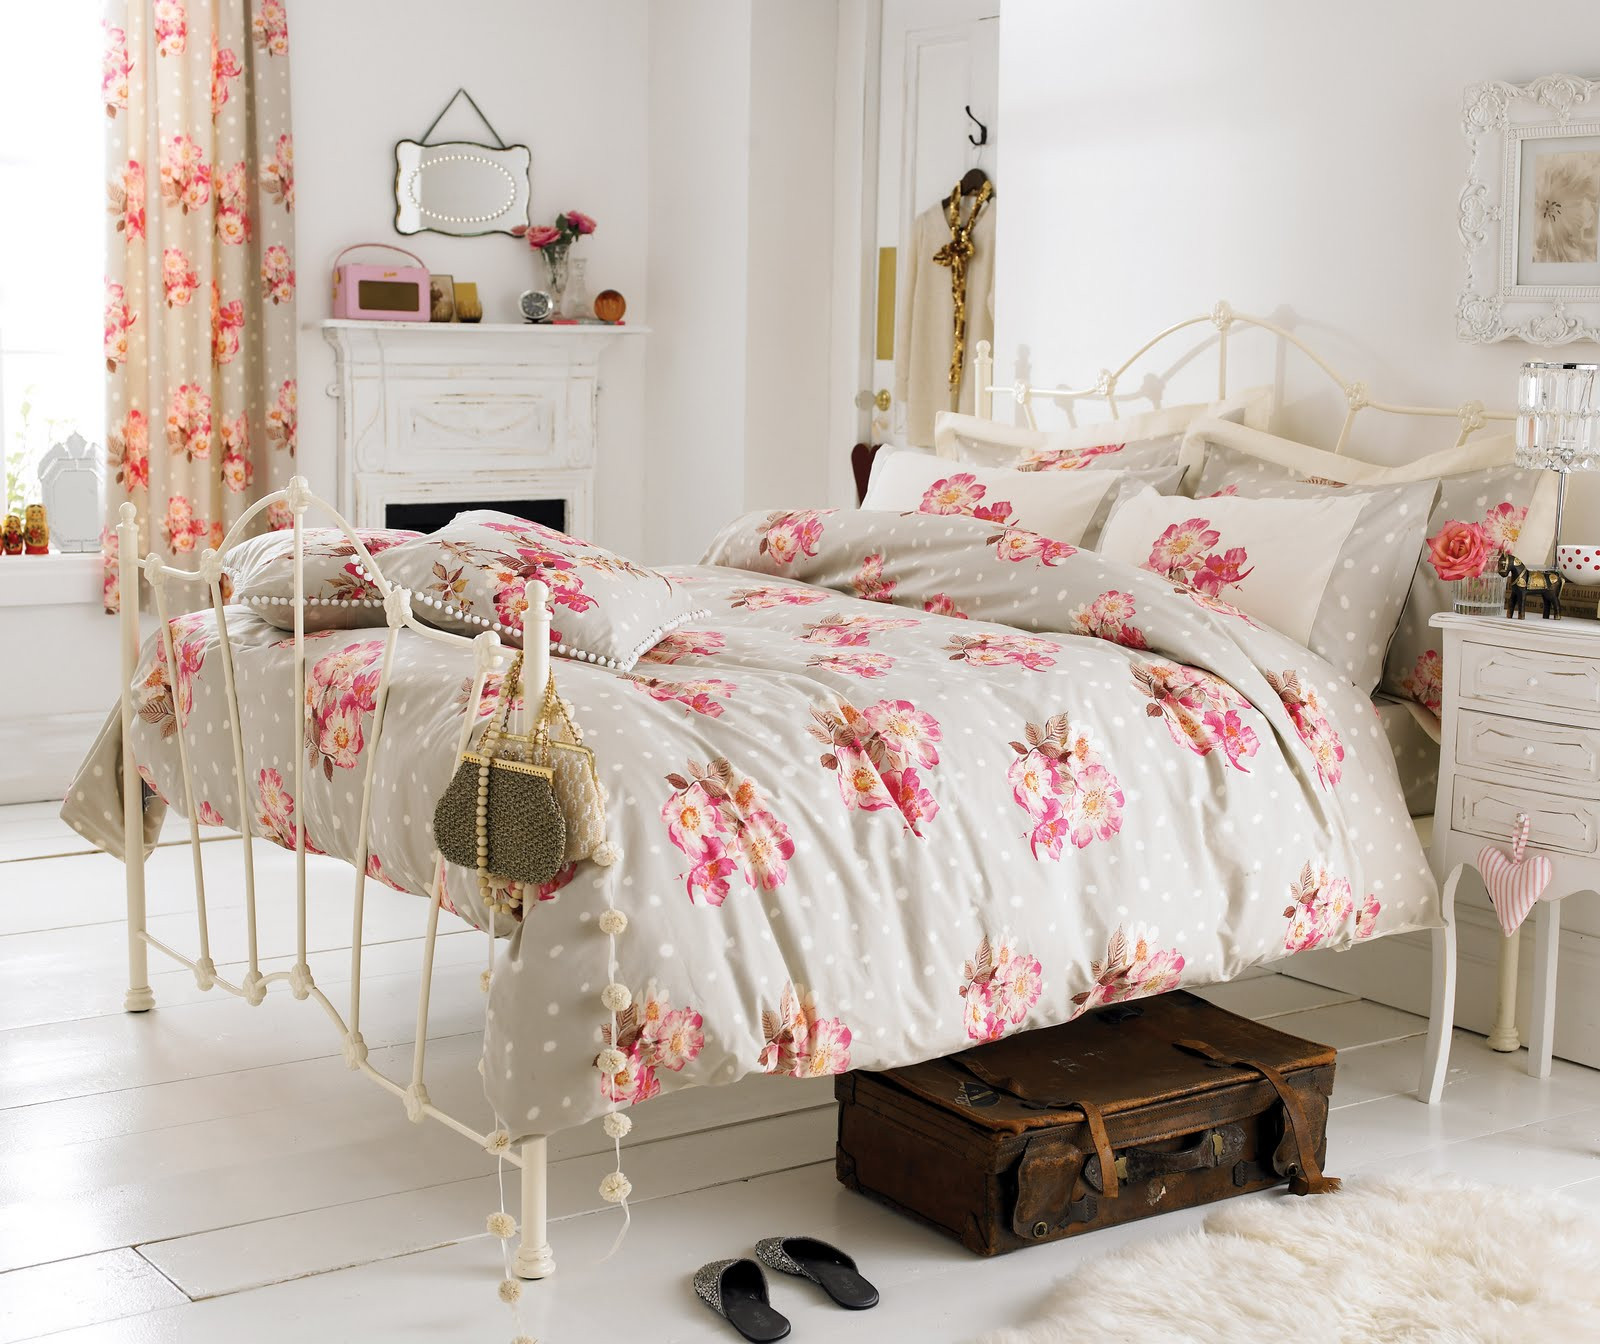 White Shabby Chic Bedroom Furniture
 50 Best Bedrooms With White Furniture for 2020